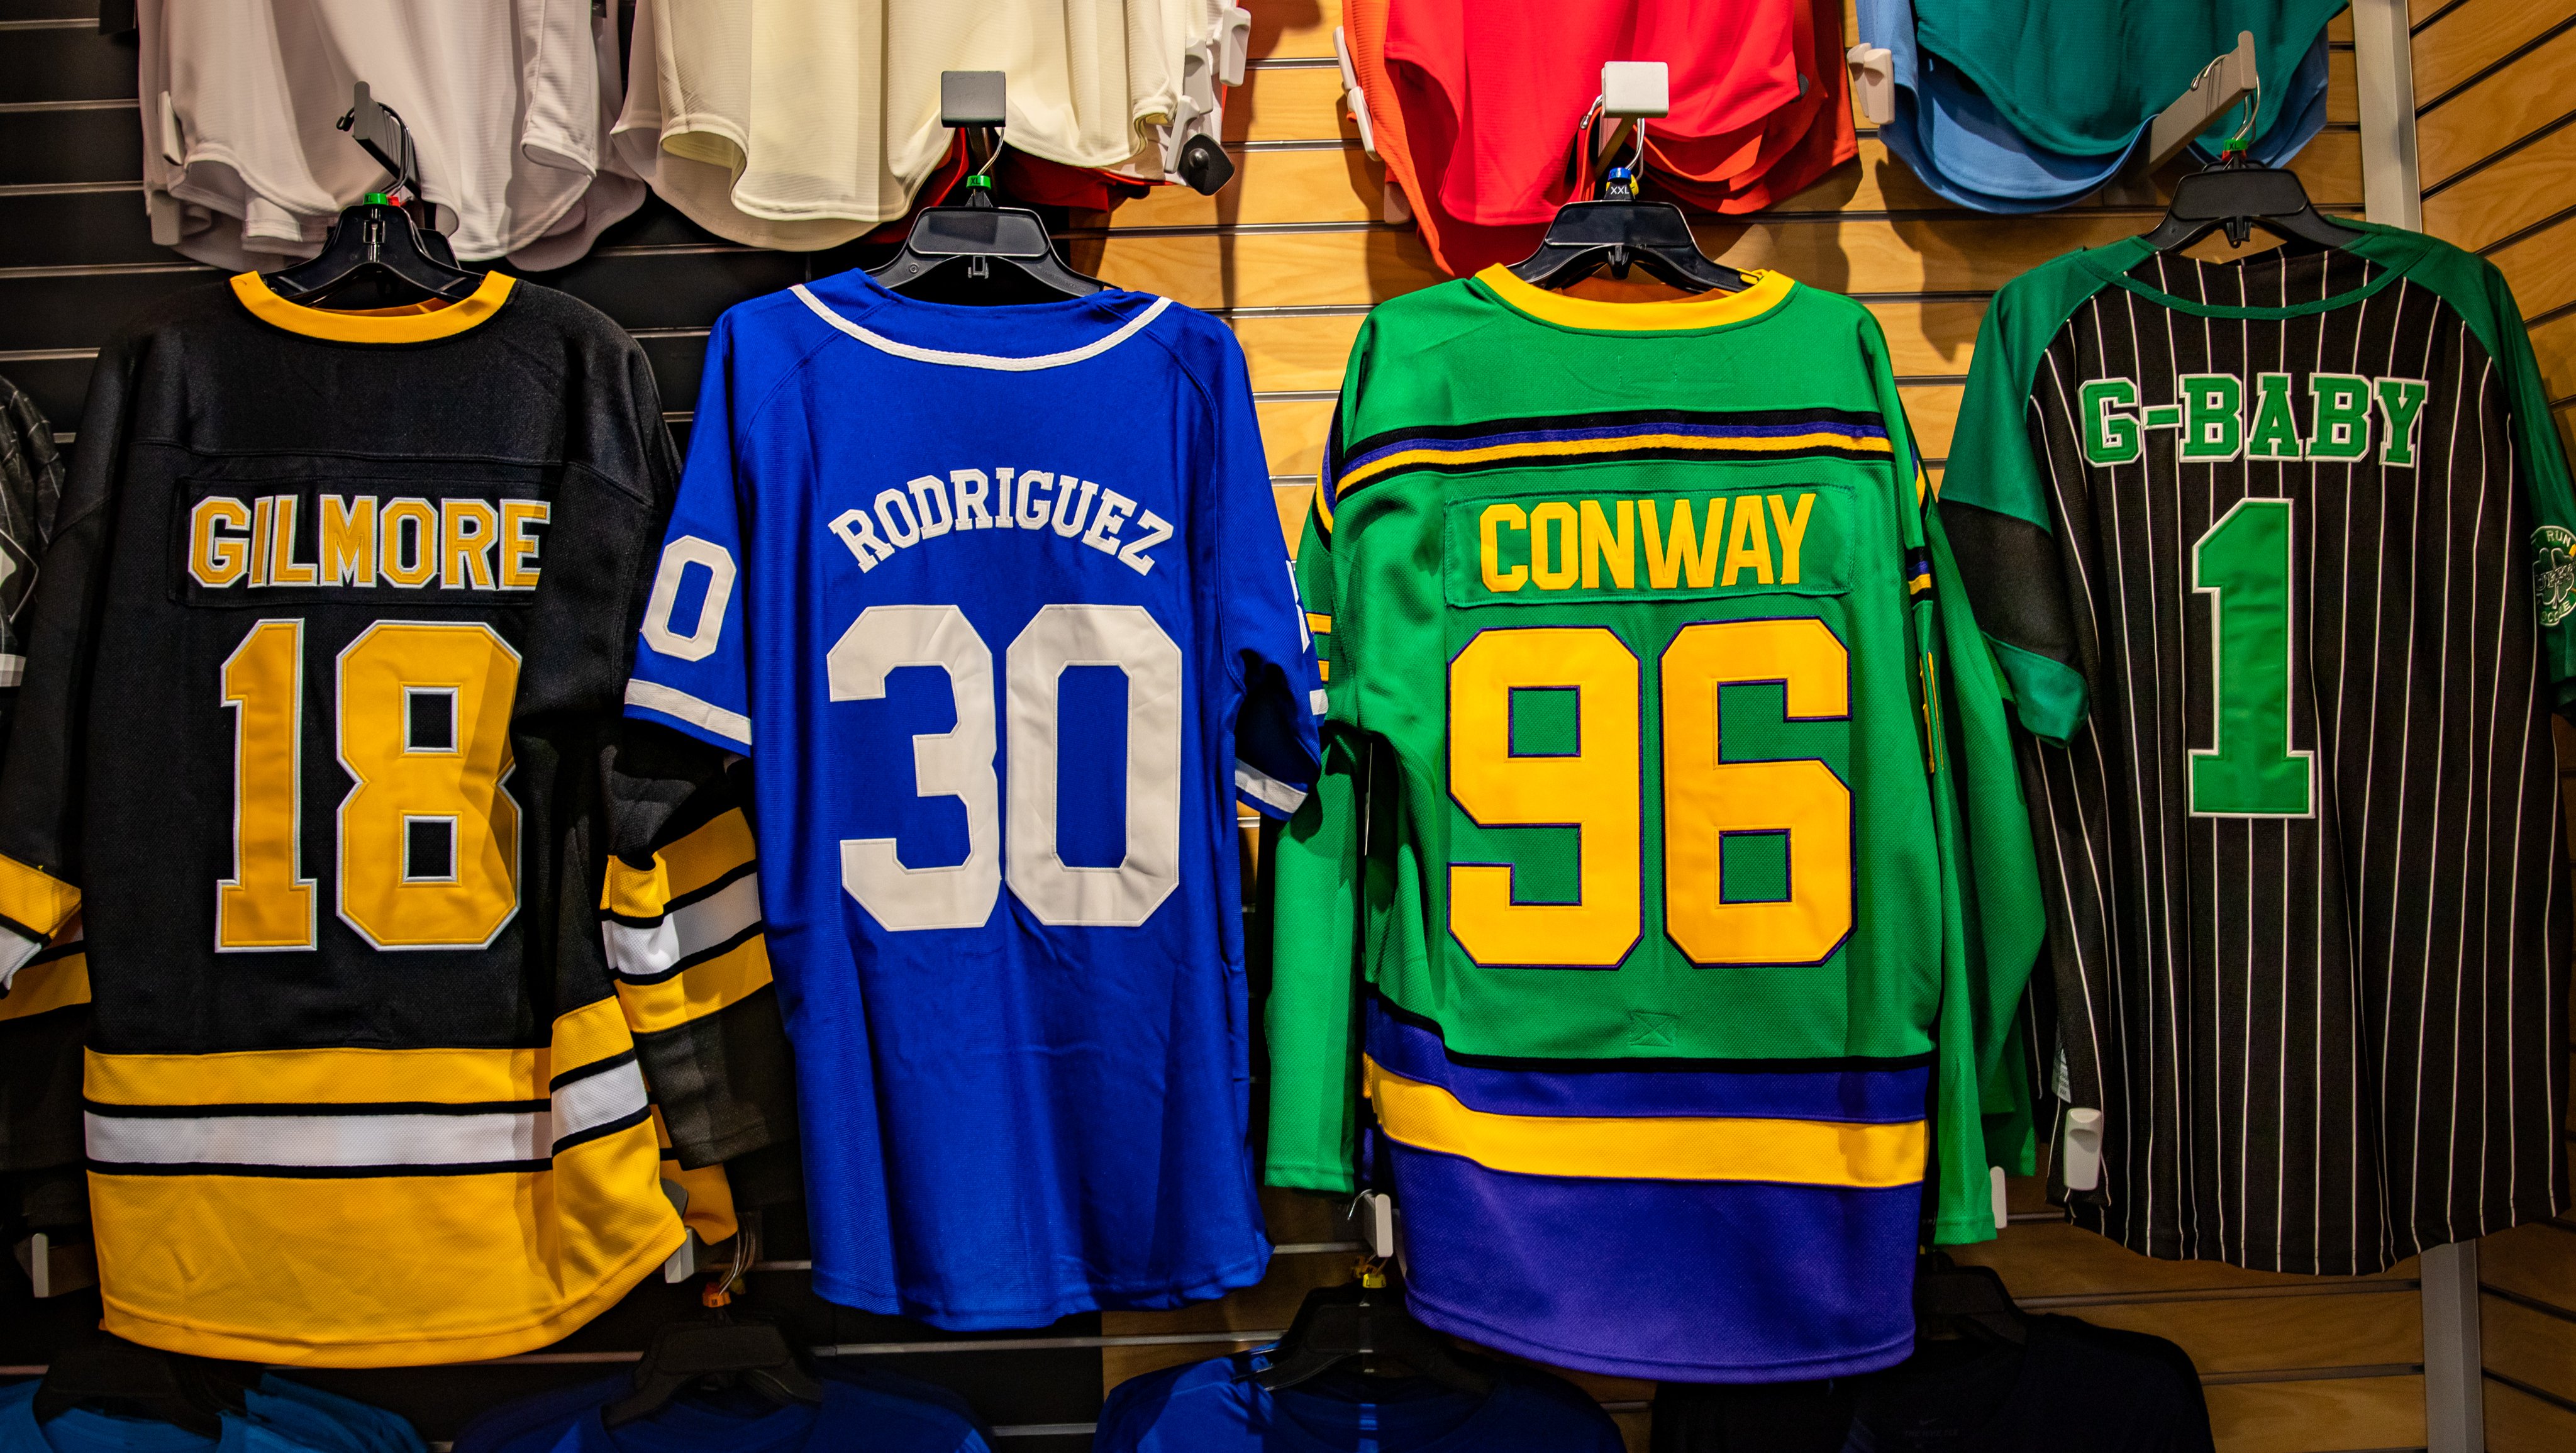 Lids on X: Looking for a Halloween costume? We've got you covered 👻 Our Classic  Reels Movie Jerseys are now 30% off. Product inventory varies by location -  head to your local